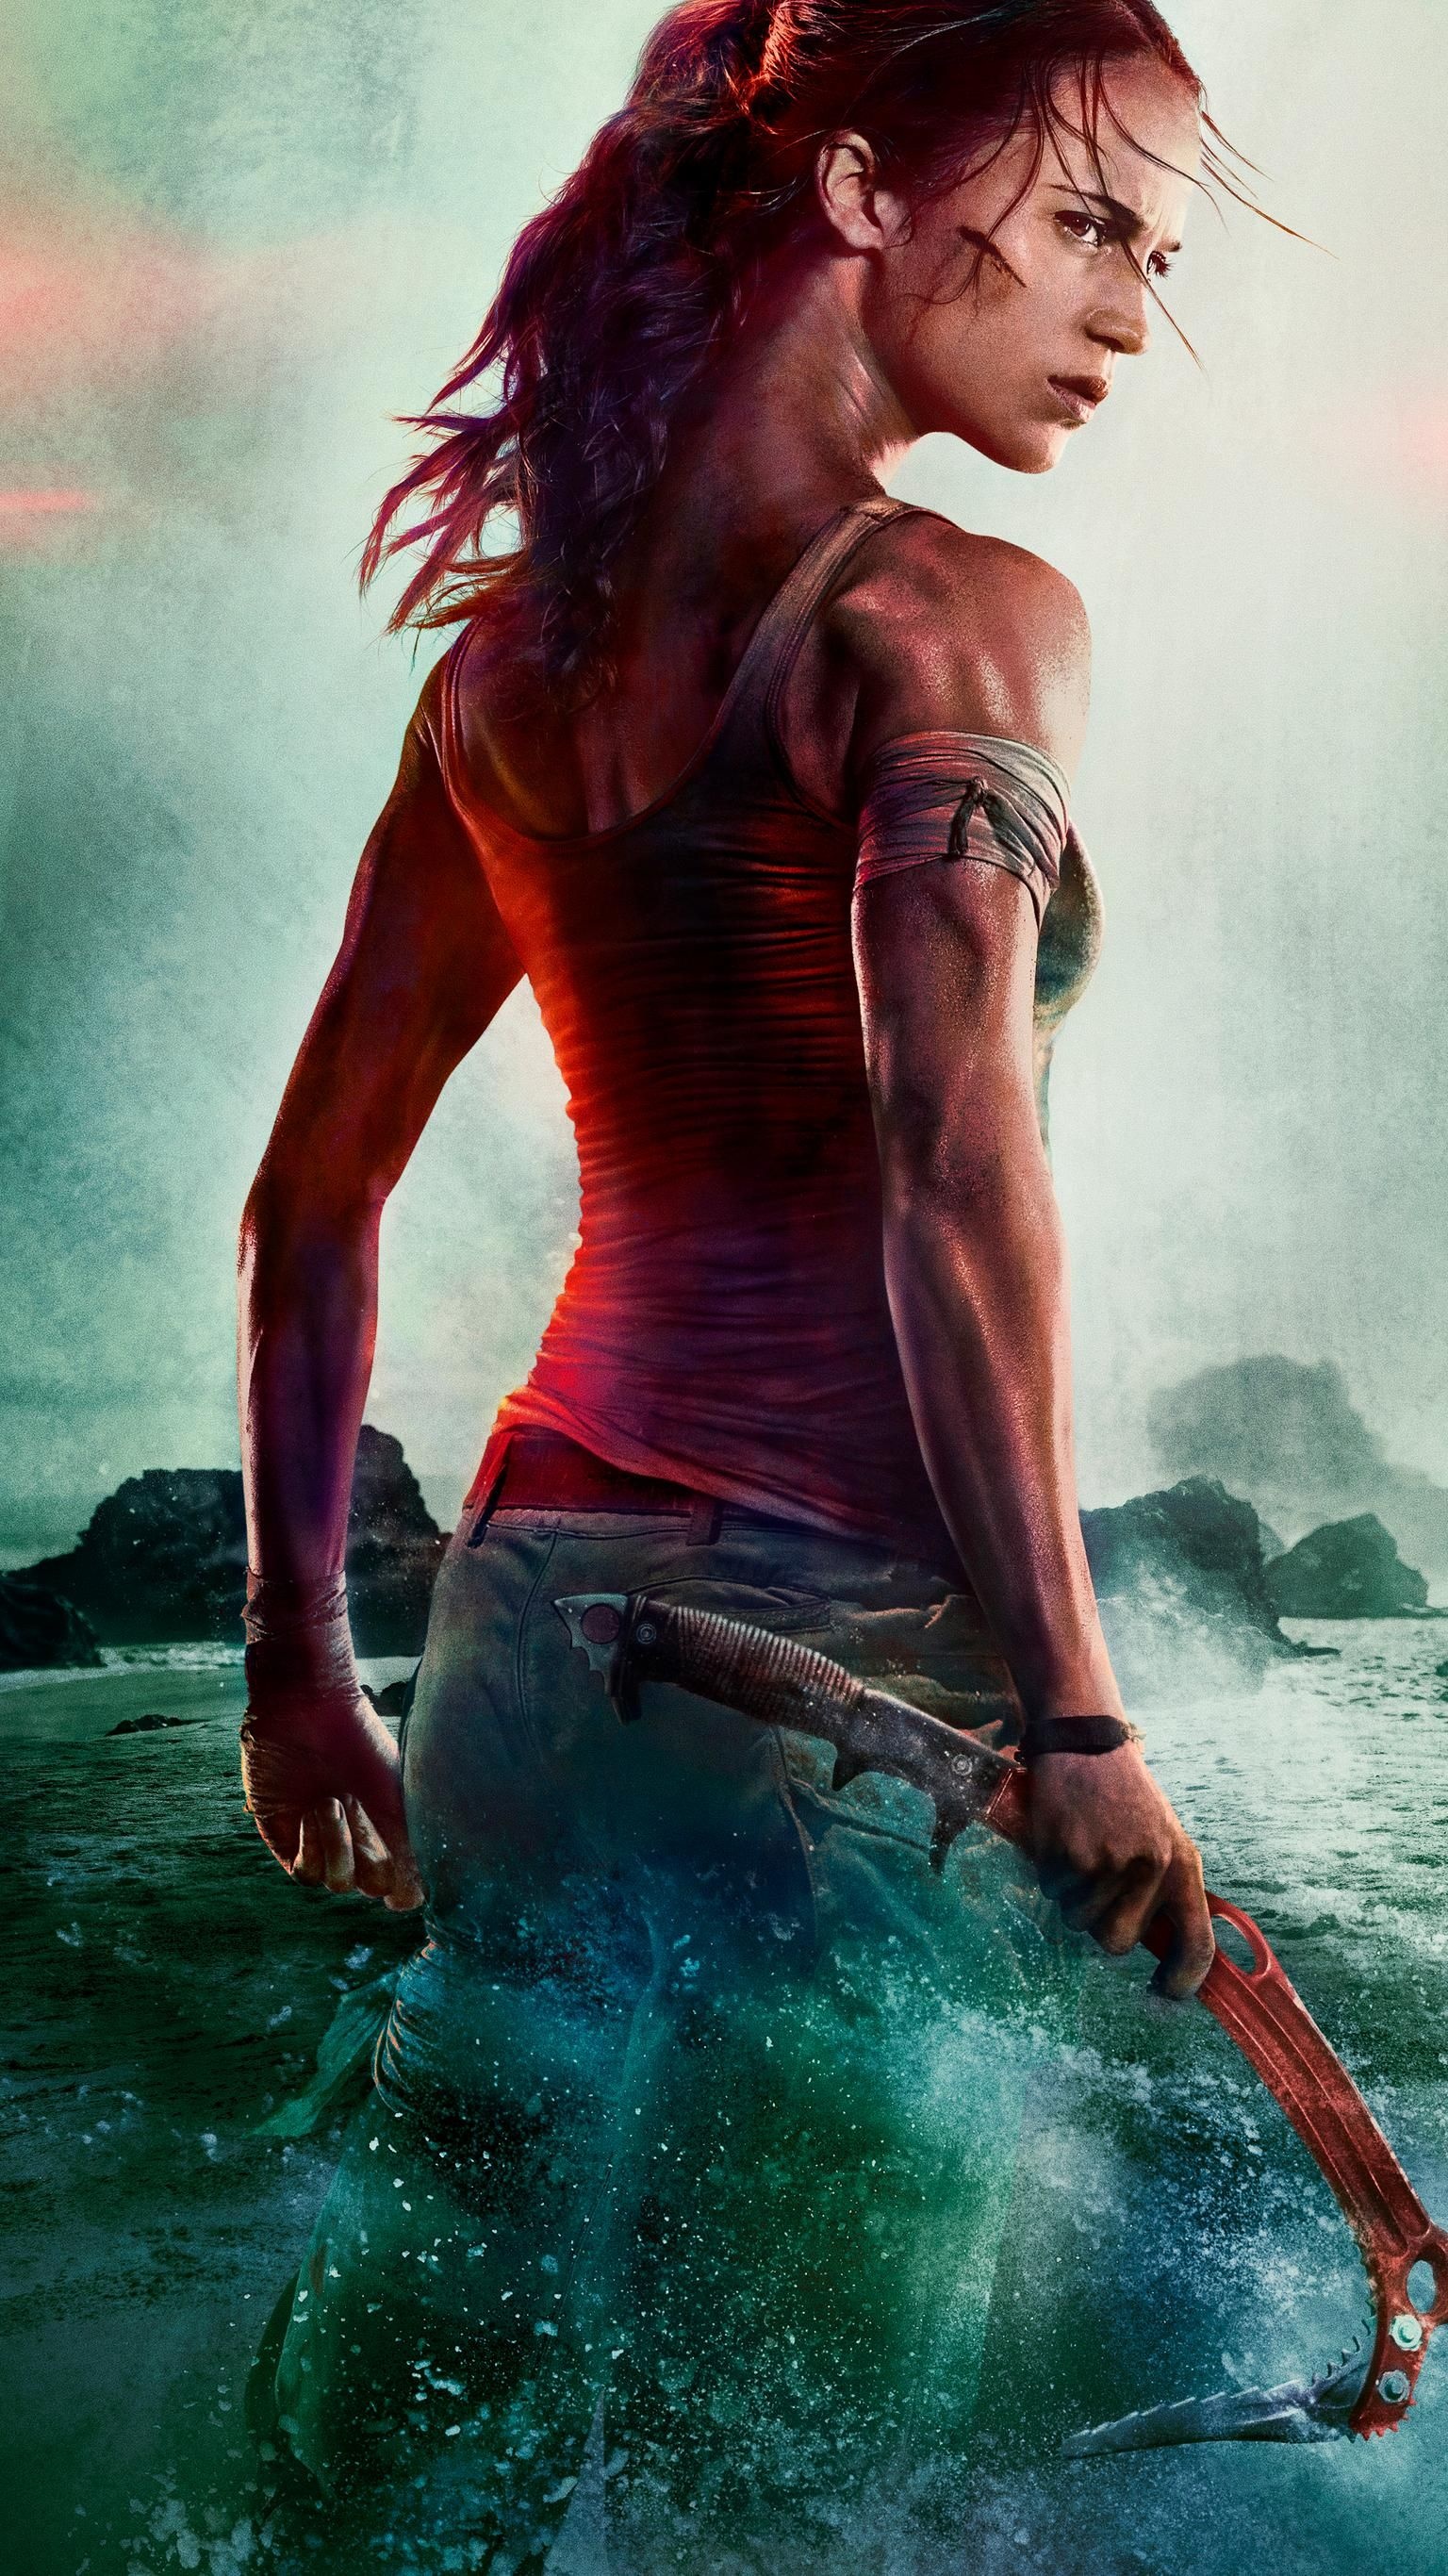 Tomb Raider: Alicia Vikander's take on the most famous fictional explorer. 1540x2740 HD Background.